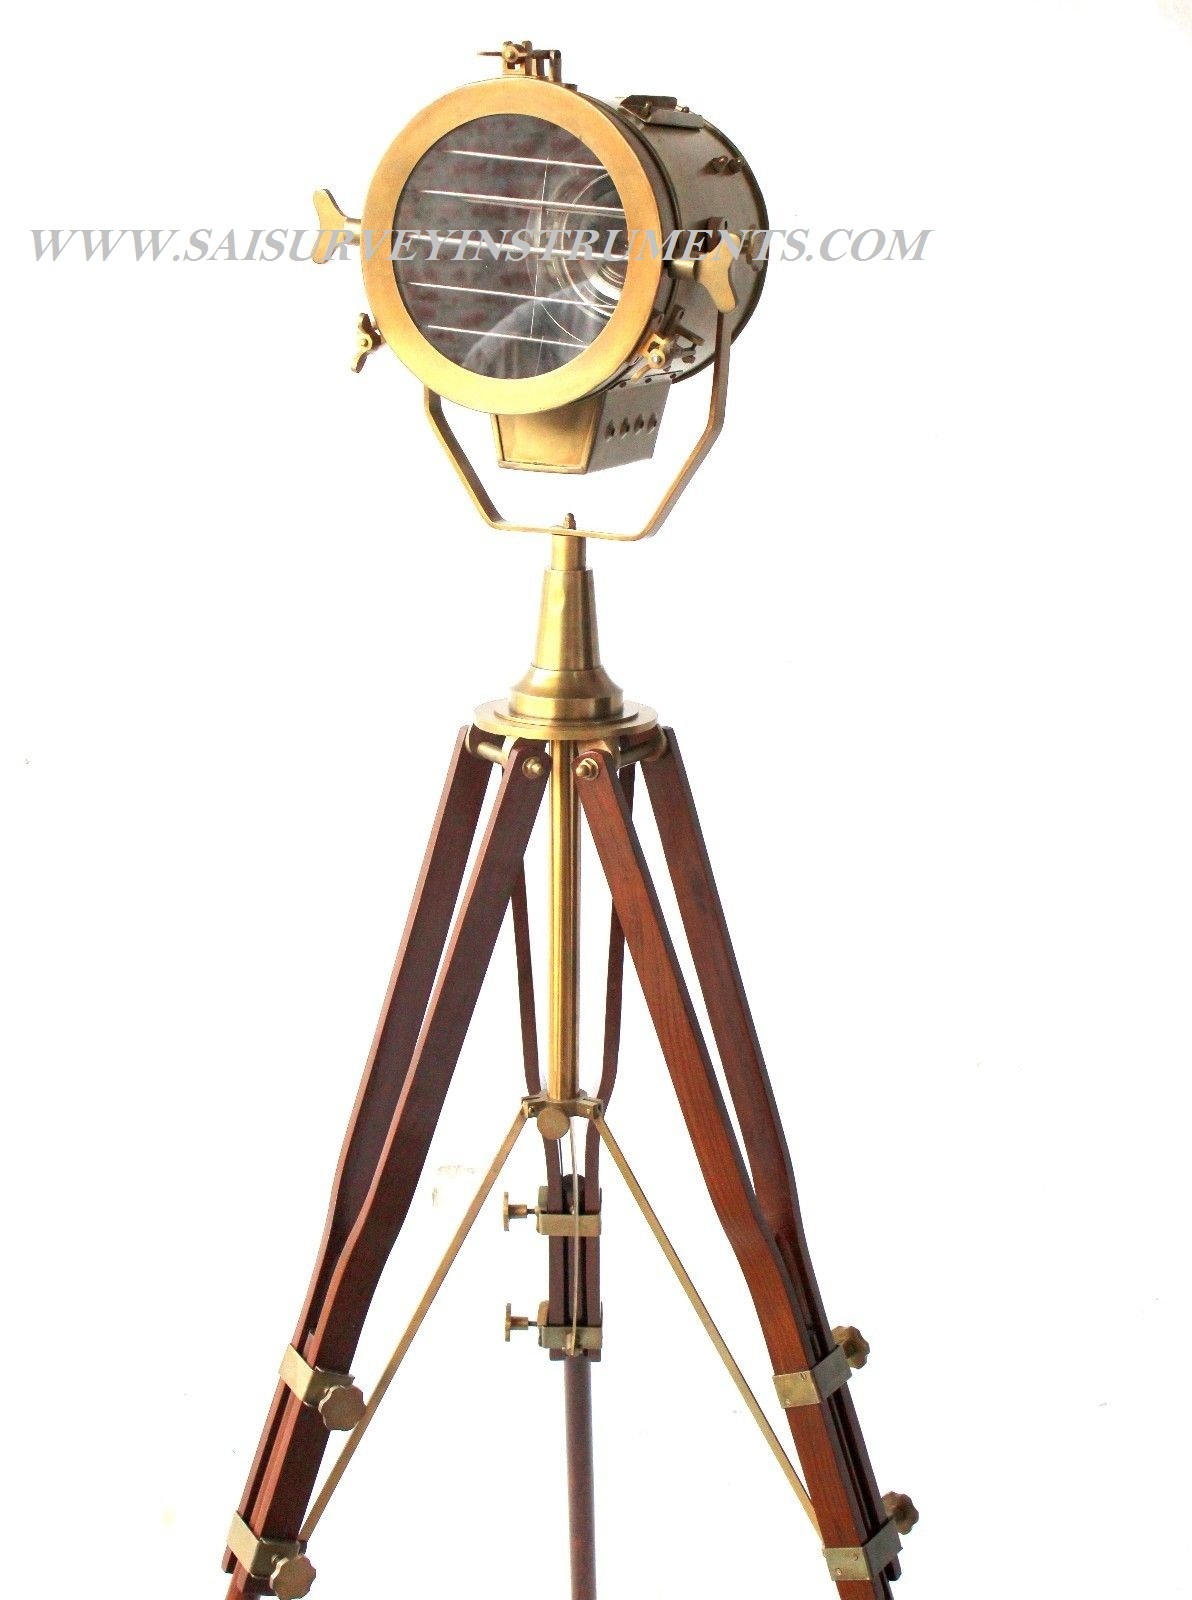 Vintage Look Designer Searchlight with Wooden Tripod Stand Collectible Brown Antique Spotlight